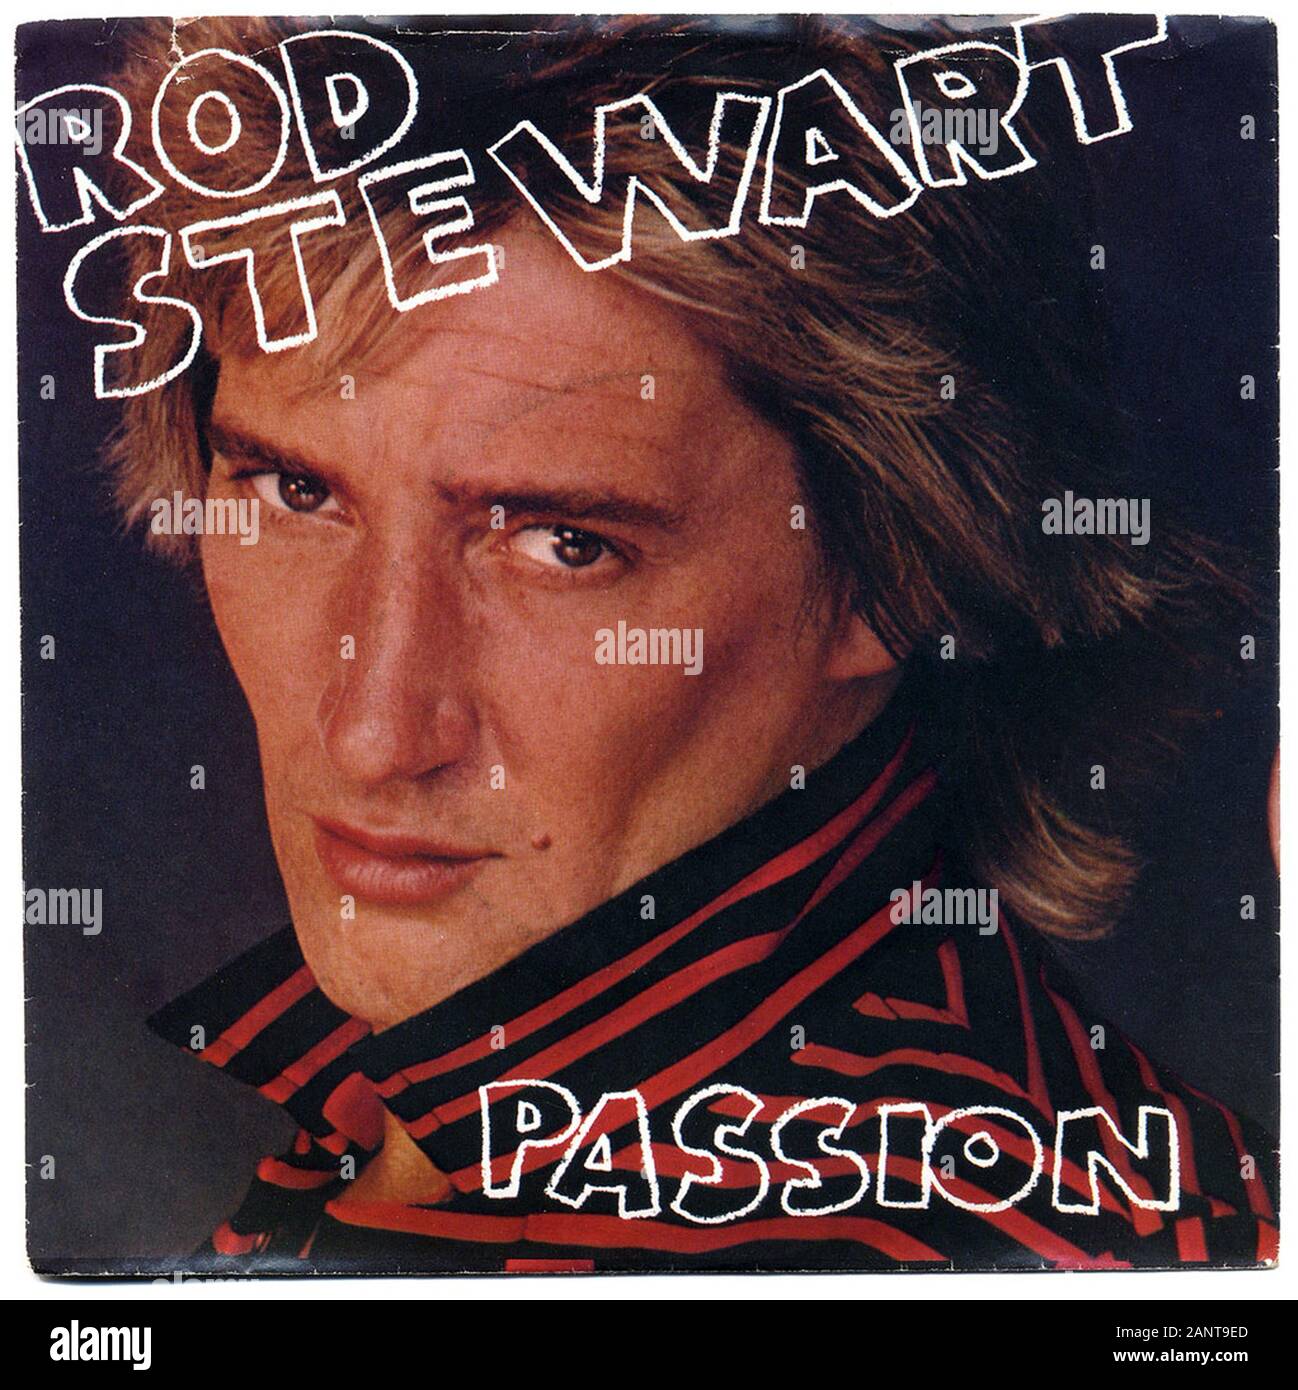 Rod stewart Cut Out Stock Images & Pictures - Alamy